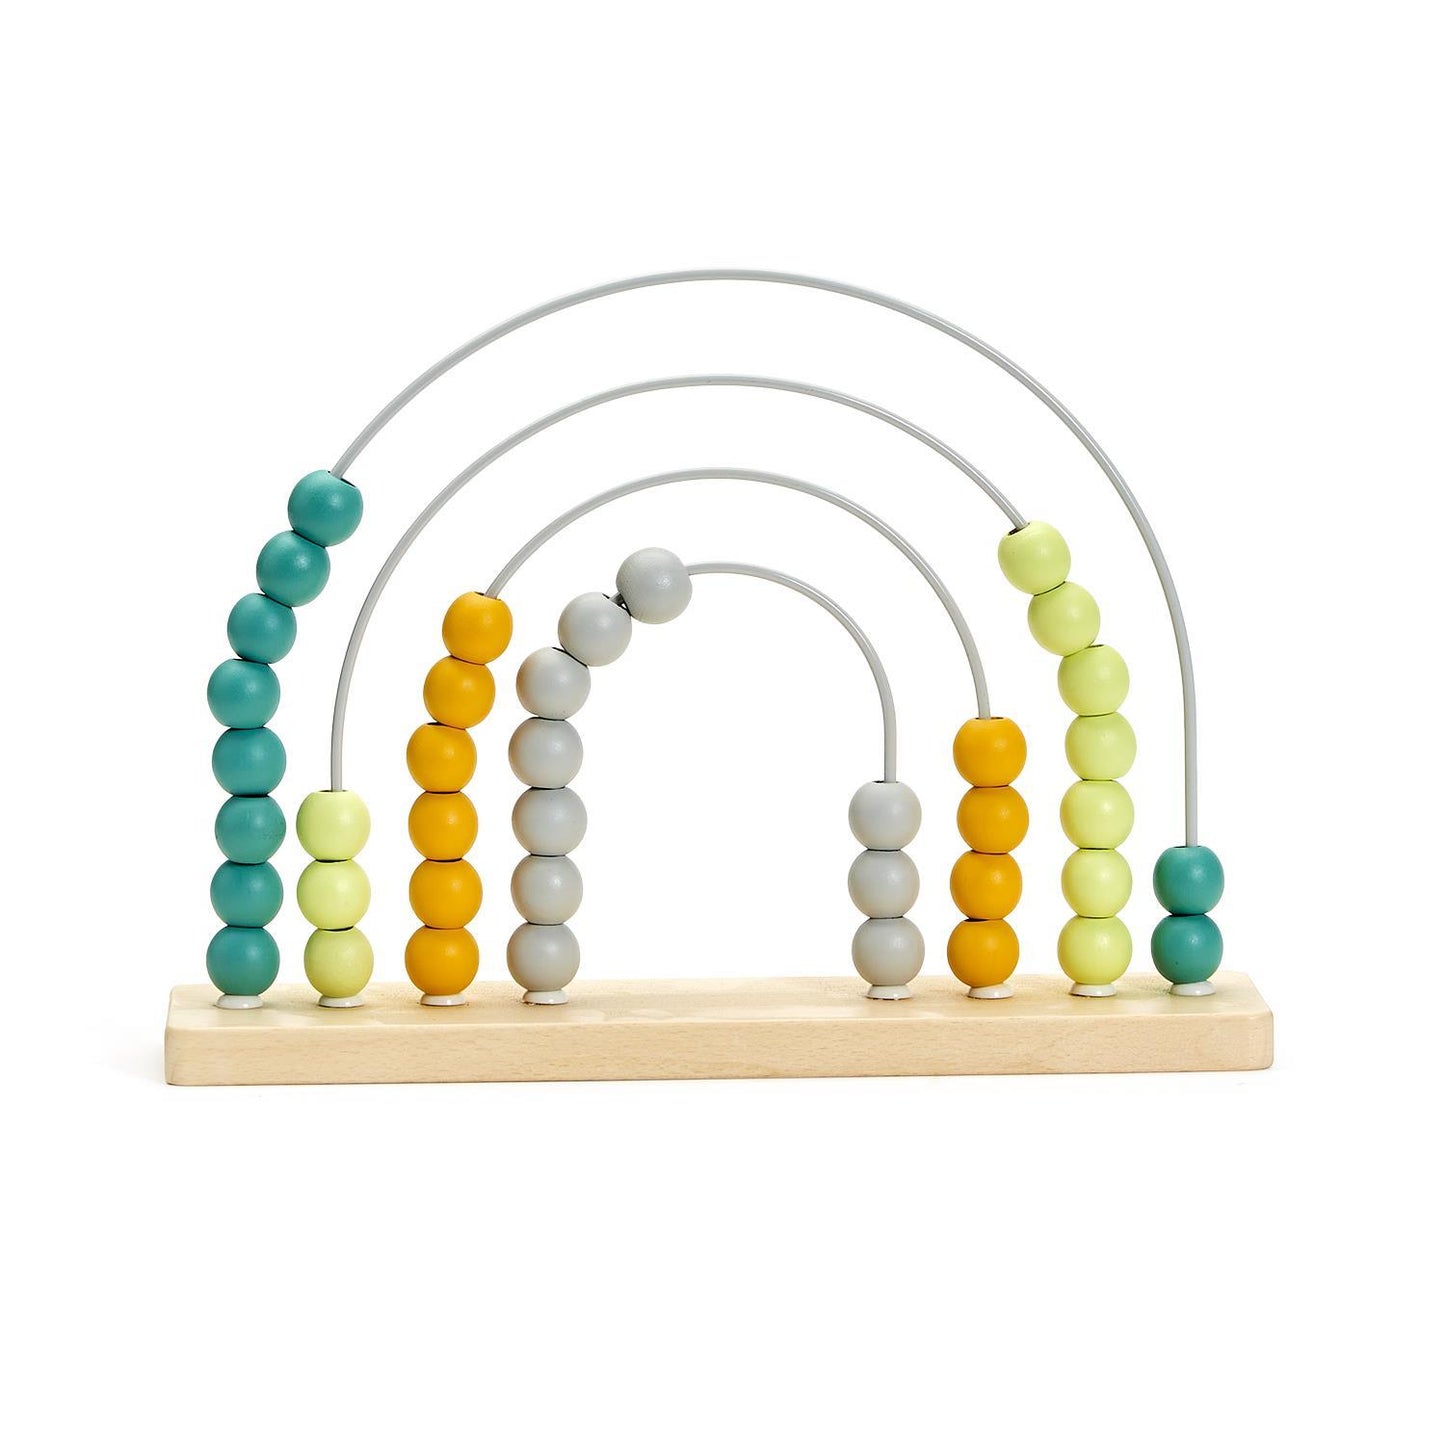 Counting Rainbows Hand-Crafted Wooden Abacus In Gift Box Assorted 2 Colorations